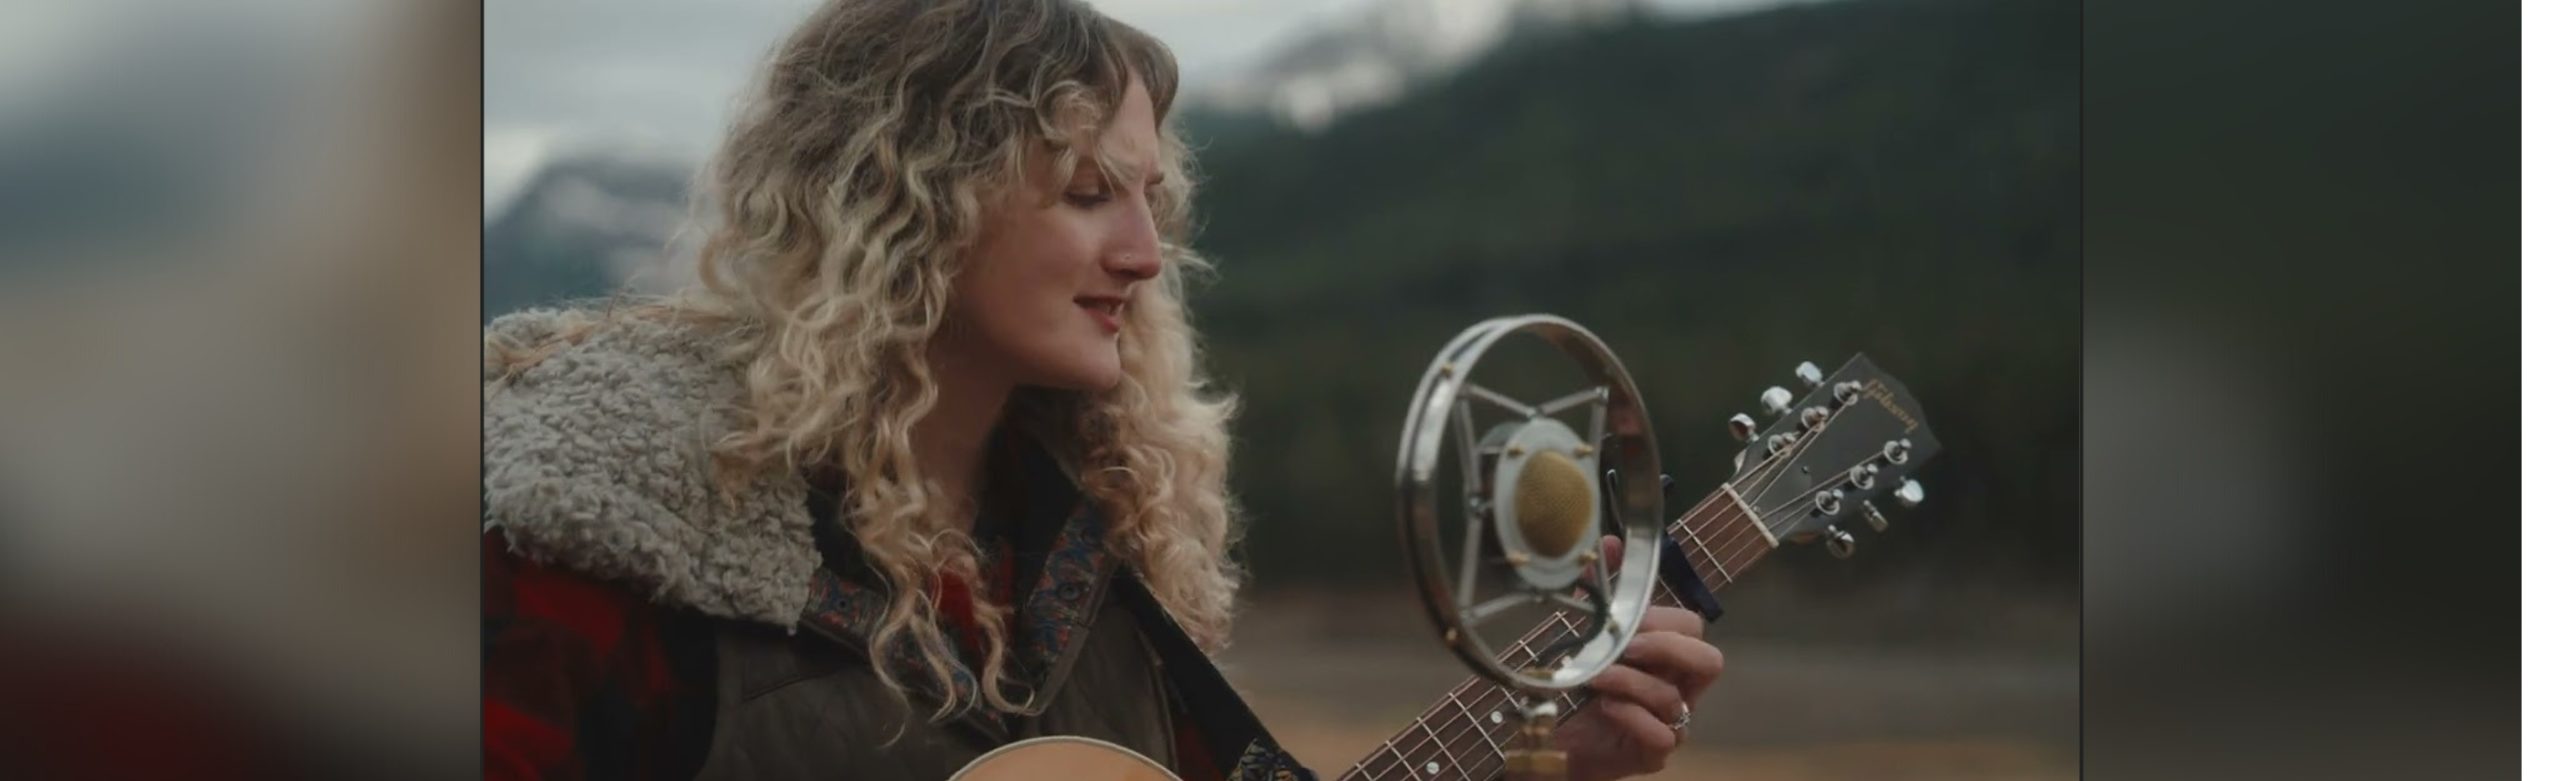 Bozeman Musician Madeline Hawthorne Releases New Video For “Long Cold Night” Ahead of NYE Performance Image